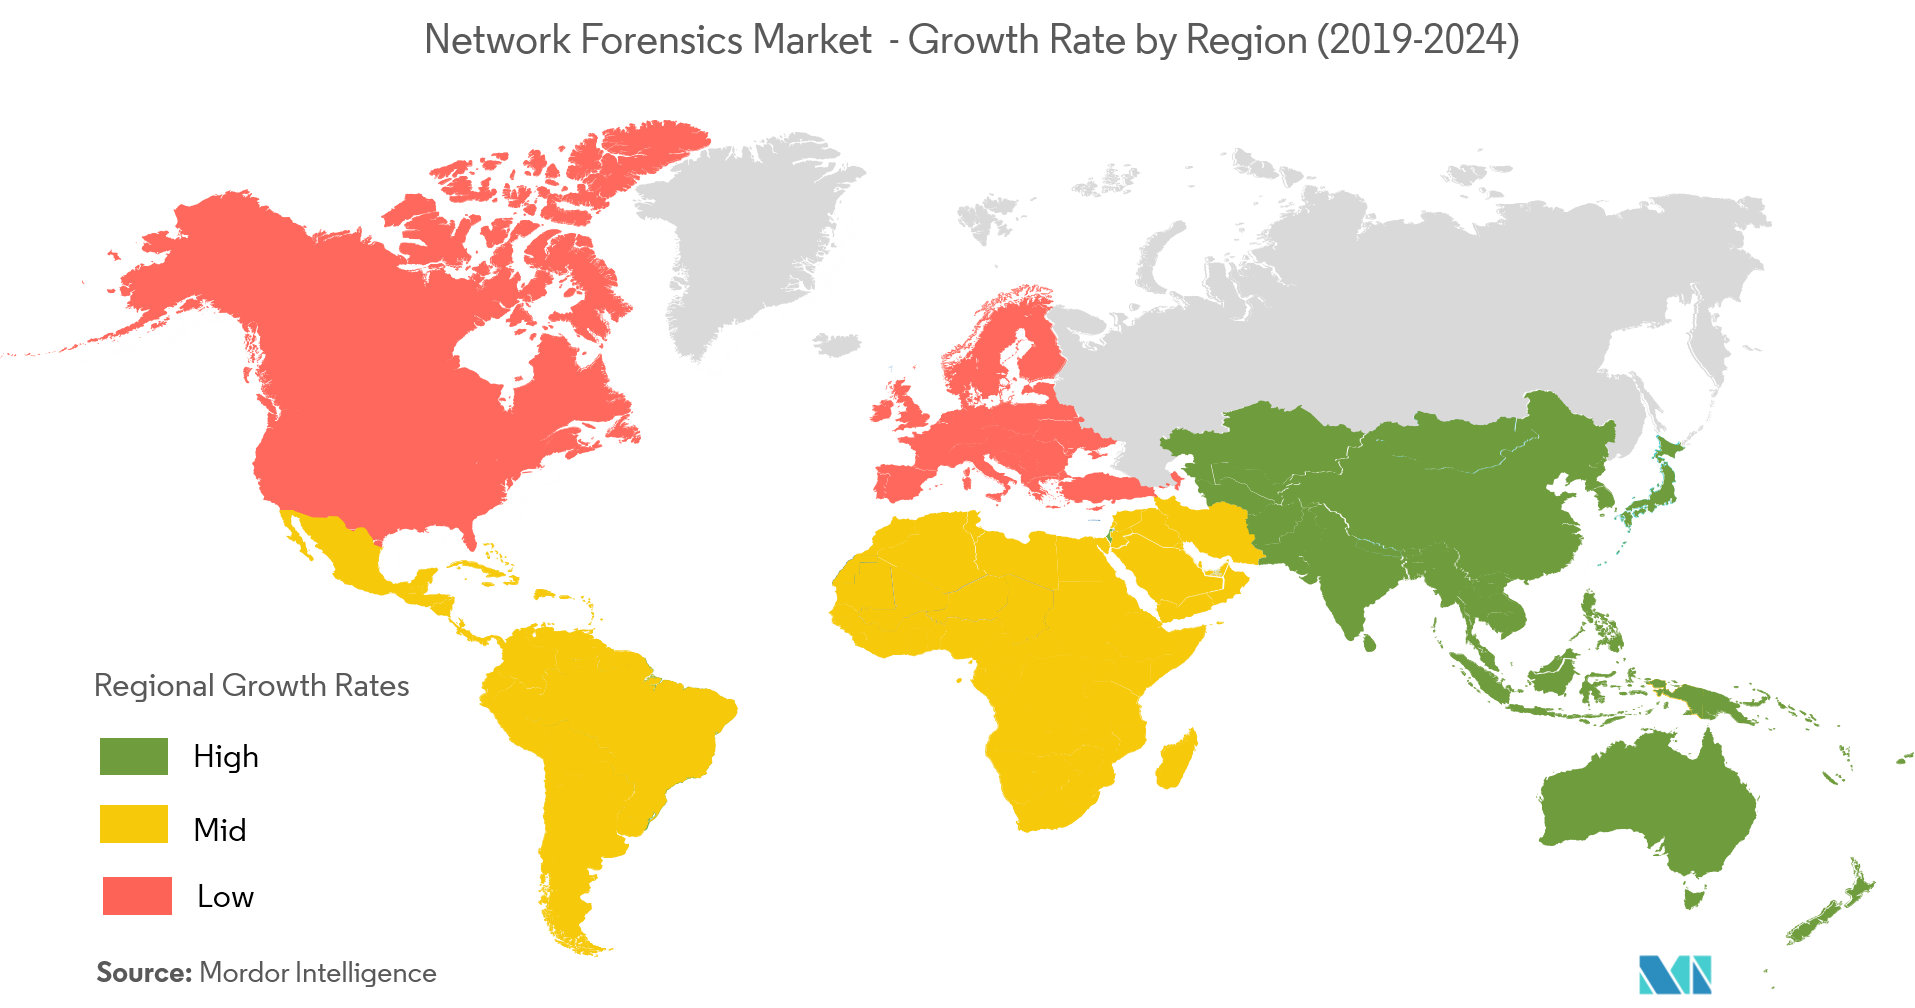 Network Forensics Market - Growth Rate by Region (2019-2024)